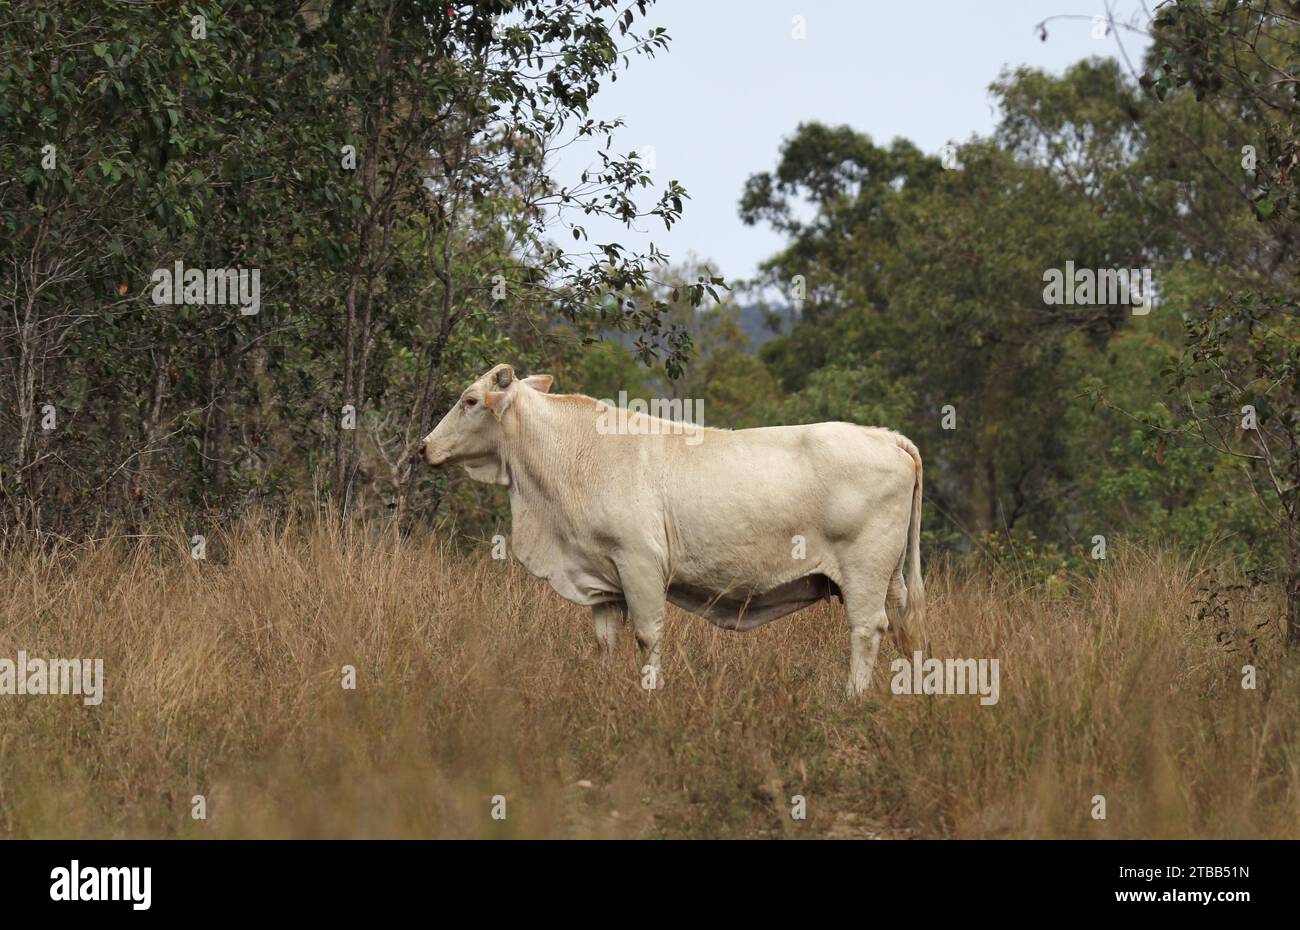 Profile of a cow in a paddock with grass and trees Stock Photo